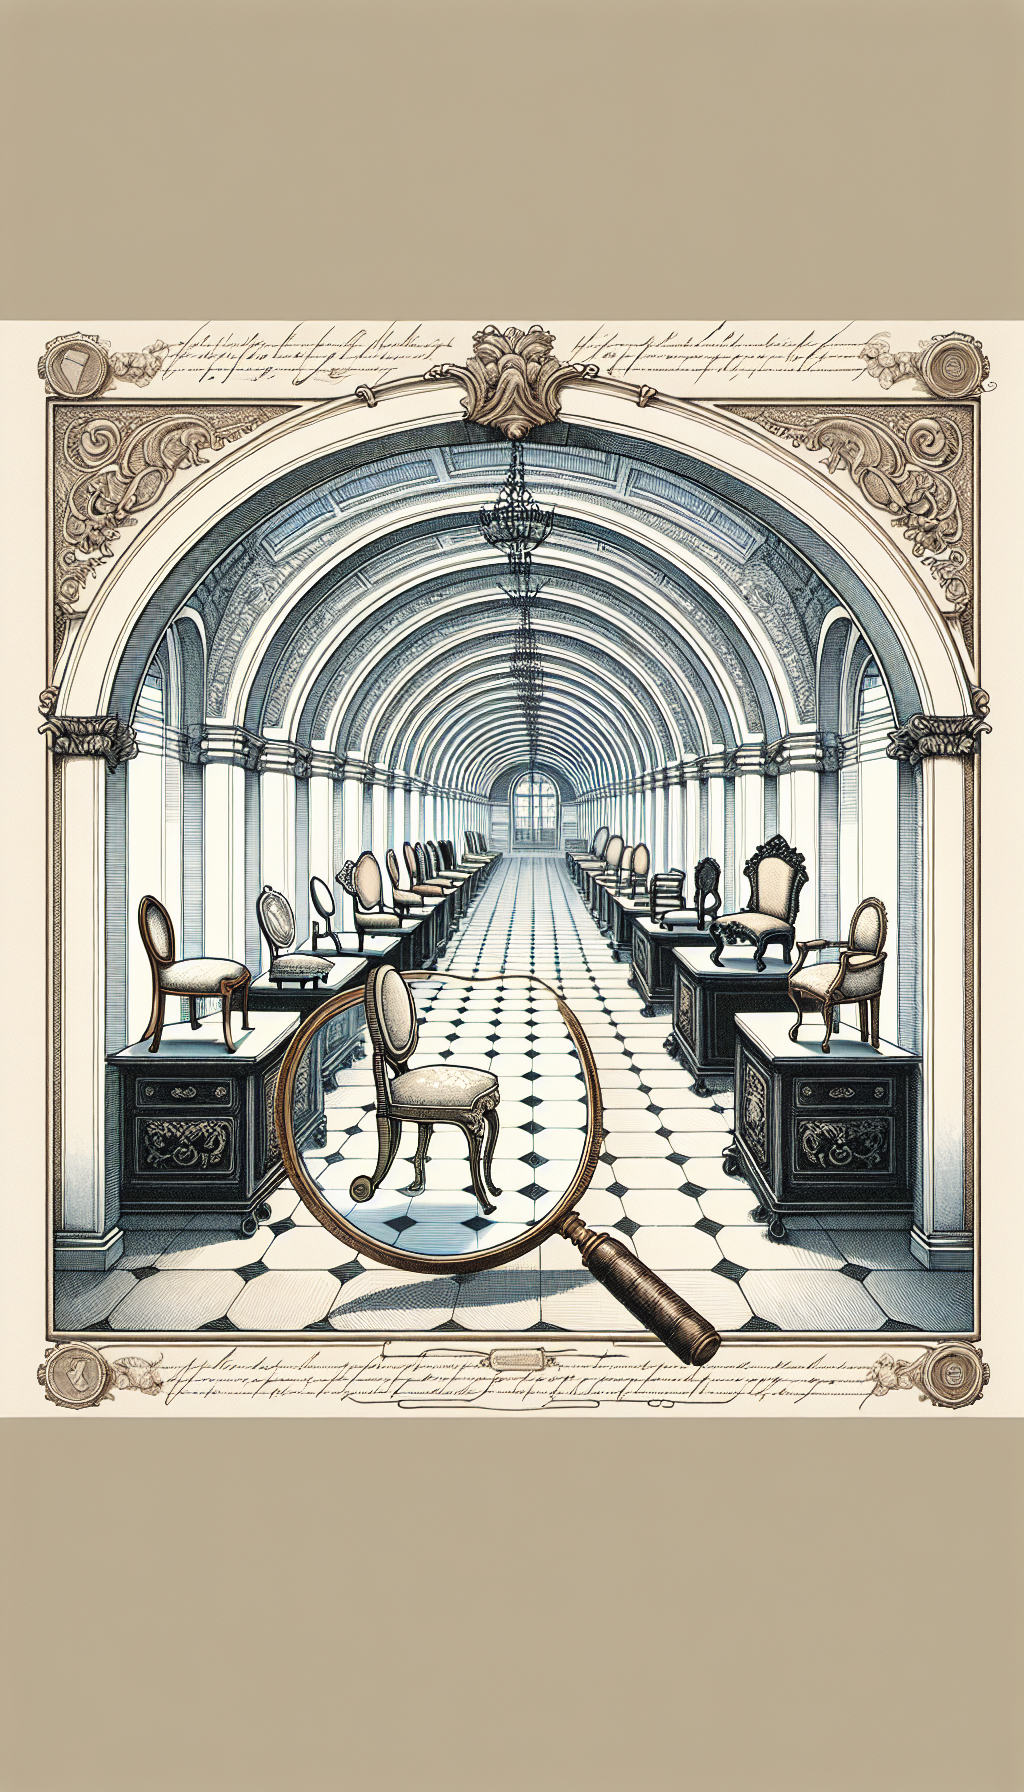 The illustration depicts a grandiose hallway with a sequence of archways, each framing a chair from a distinct era. Flowing from Rococo's ornate asymmetry to Regency's refined lines, each arch progressively transforms, capturing the essence of the period's style. A magnifying glass hovers over each chair, symbolizing the identification process, with stylistic annotations adorning the borders like an antique collector's meticulous notes.